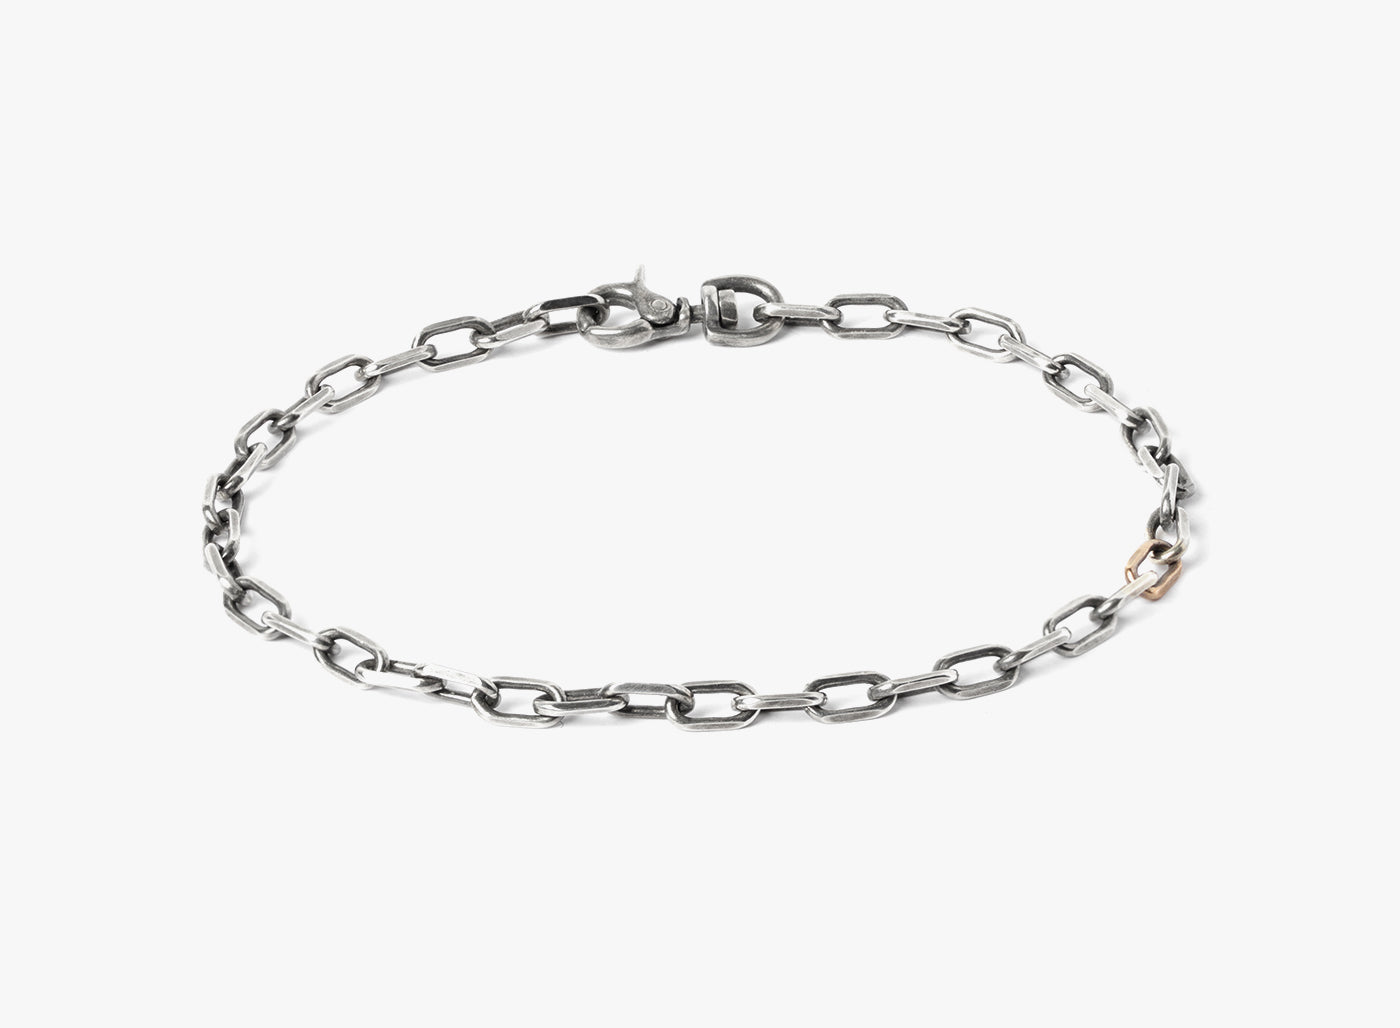 MIXED METAL BRACELET 034: a single 18k rose gold link complements a sterling anchor cable, fastened by a carabiner lobster clasp